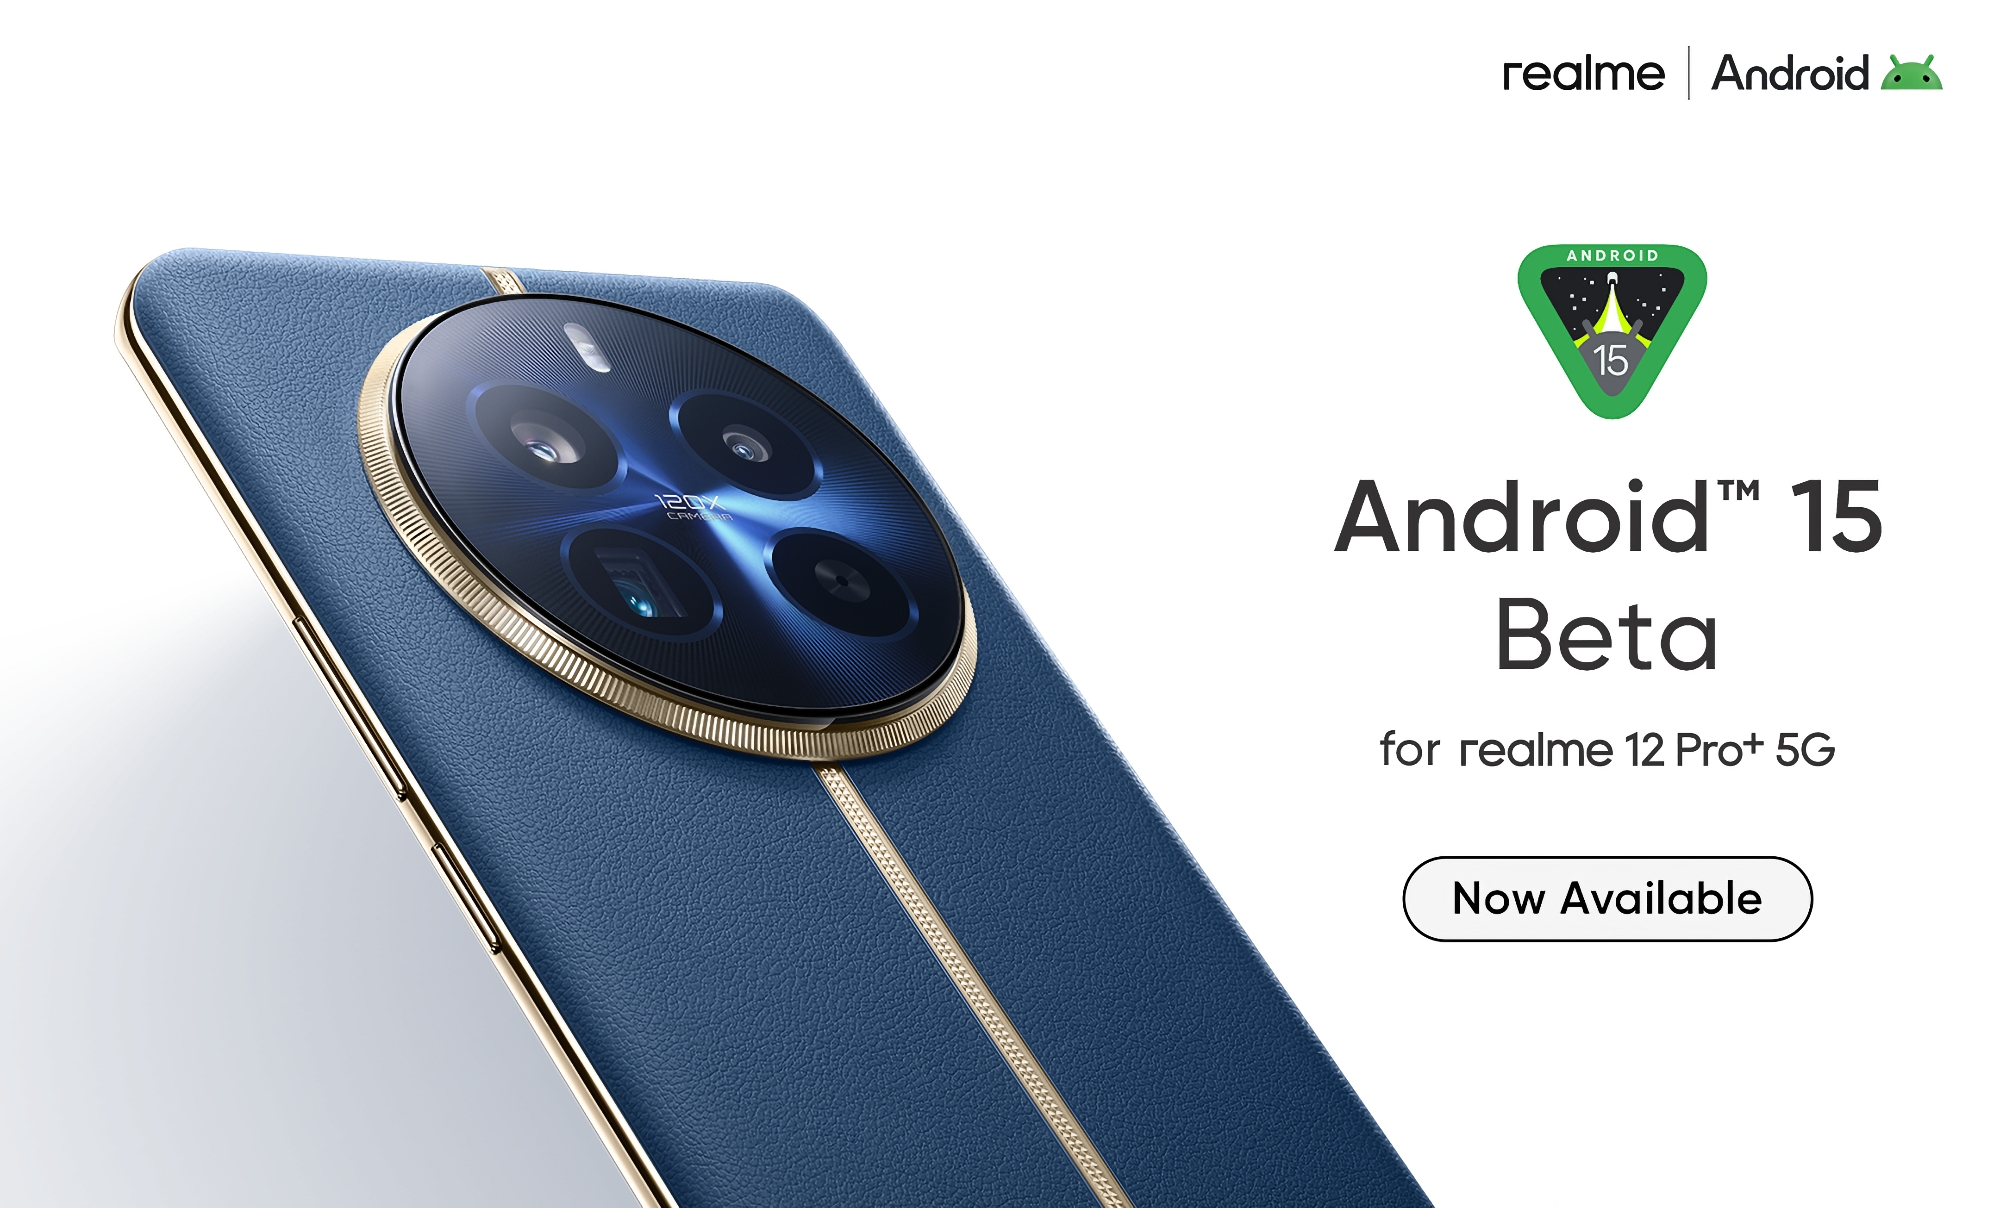 The realme 12 Pro+ has received the second beta of Android 15